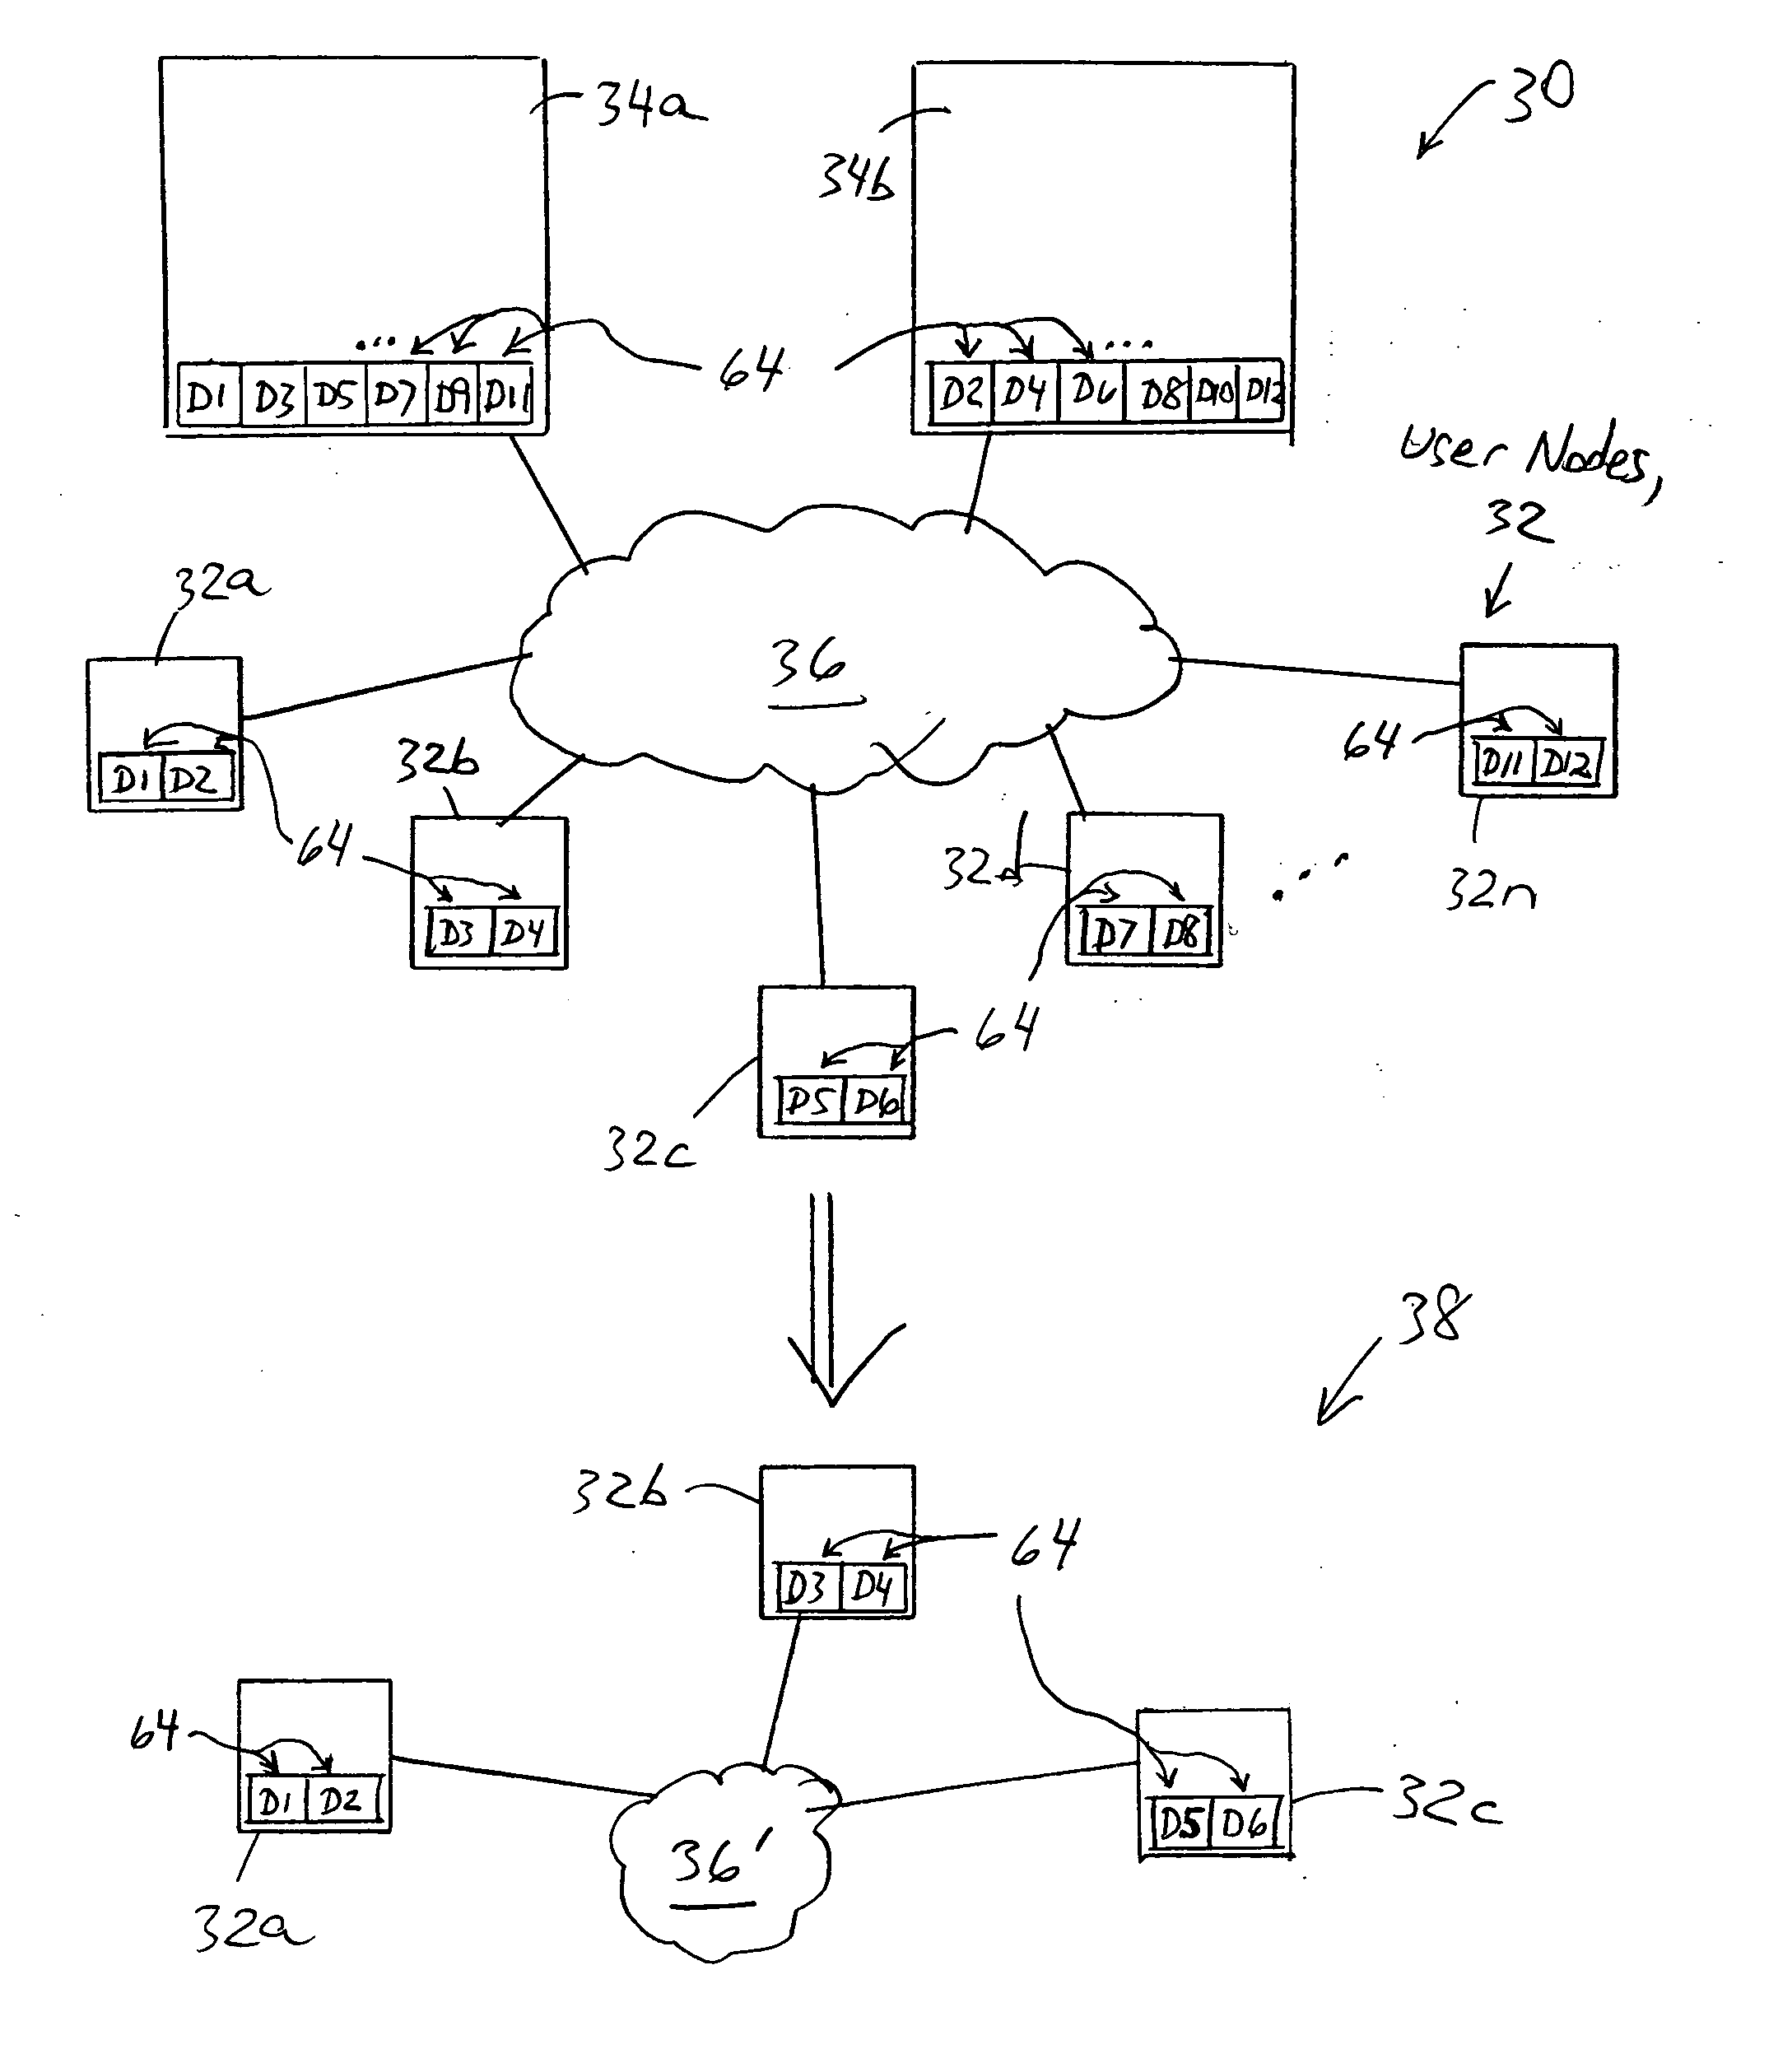 Arrangement for recovery of data by network nodes based on retrieval of encoded data distributed among the network nodes